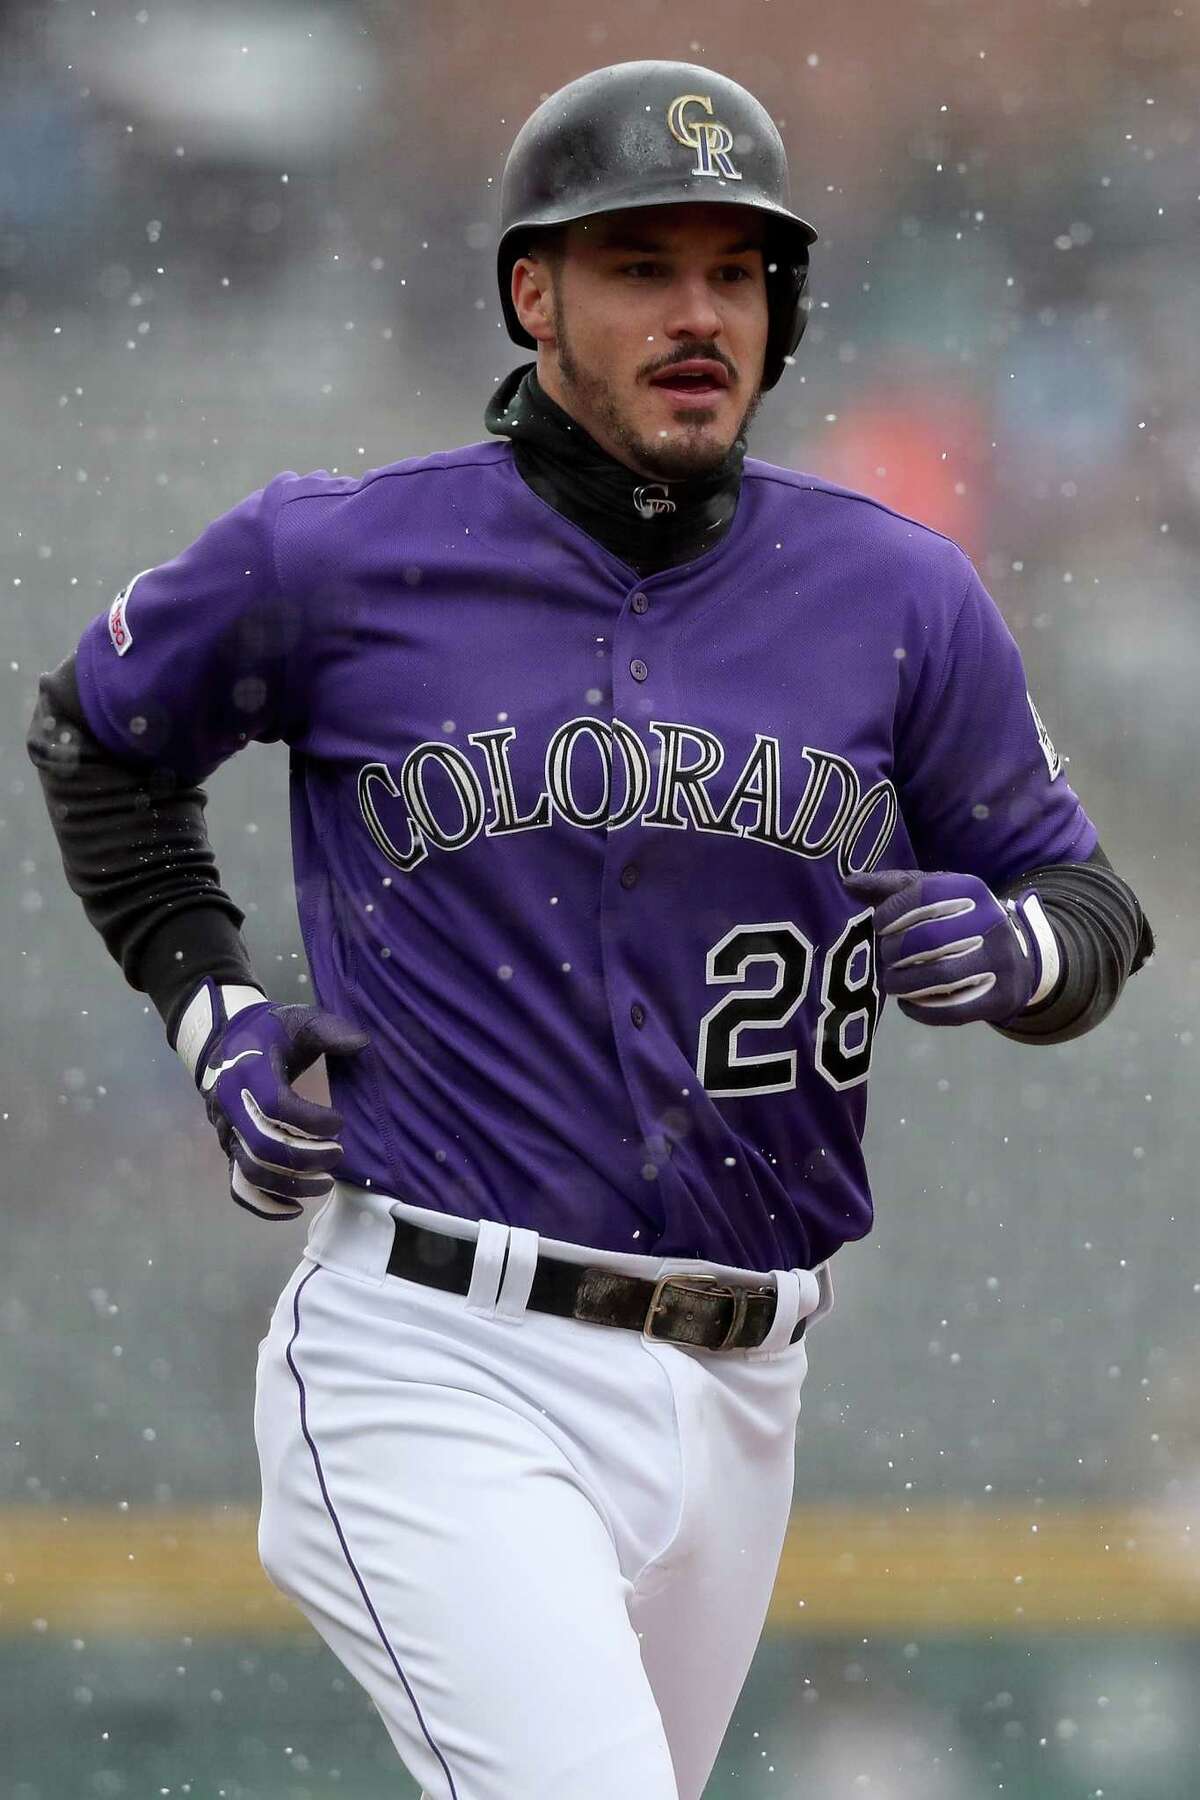 DENVER, COLORADO - MAY 09: Nolan Arenado #28 of the Colorado Rockies circles the bases after hitting a 2 RBI home run in the first inning against the San Francisco Giants at Coors Field on May 09, 2019 in Denver, Colorado. (Photo by Matthew Stockman/Getty Images)